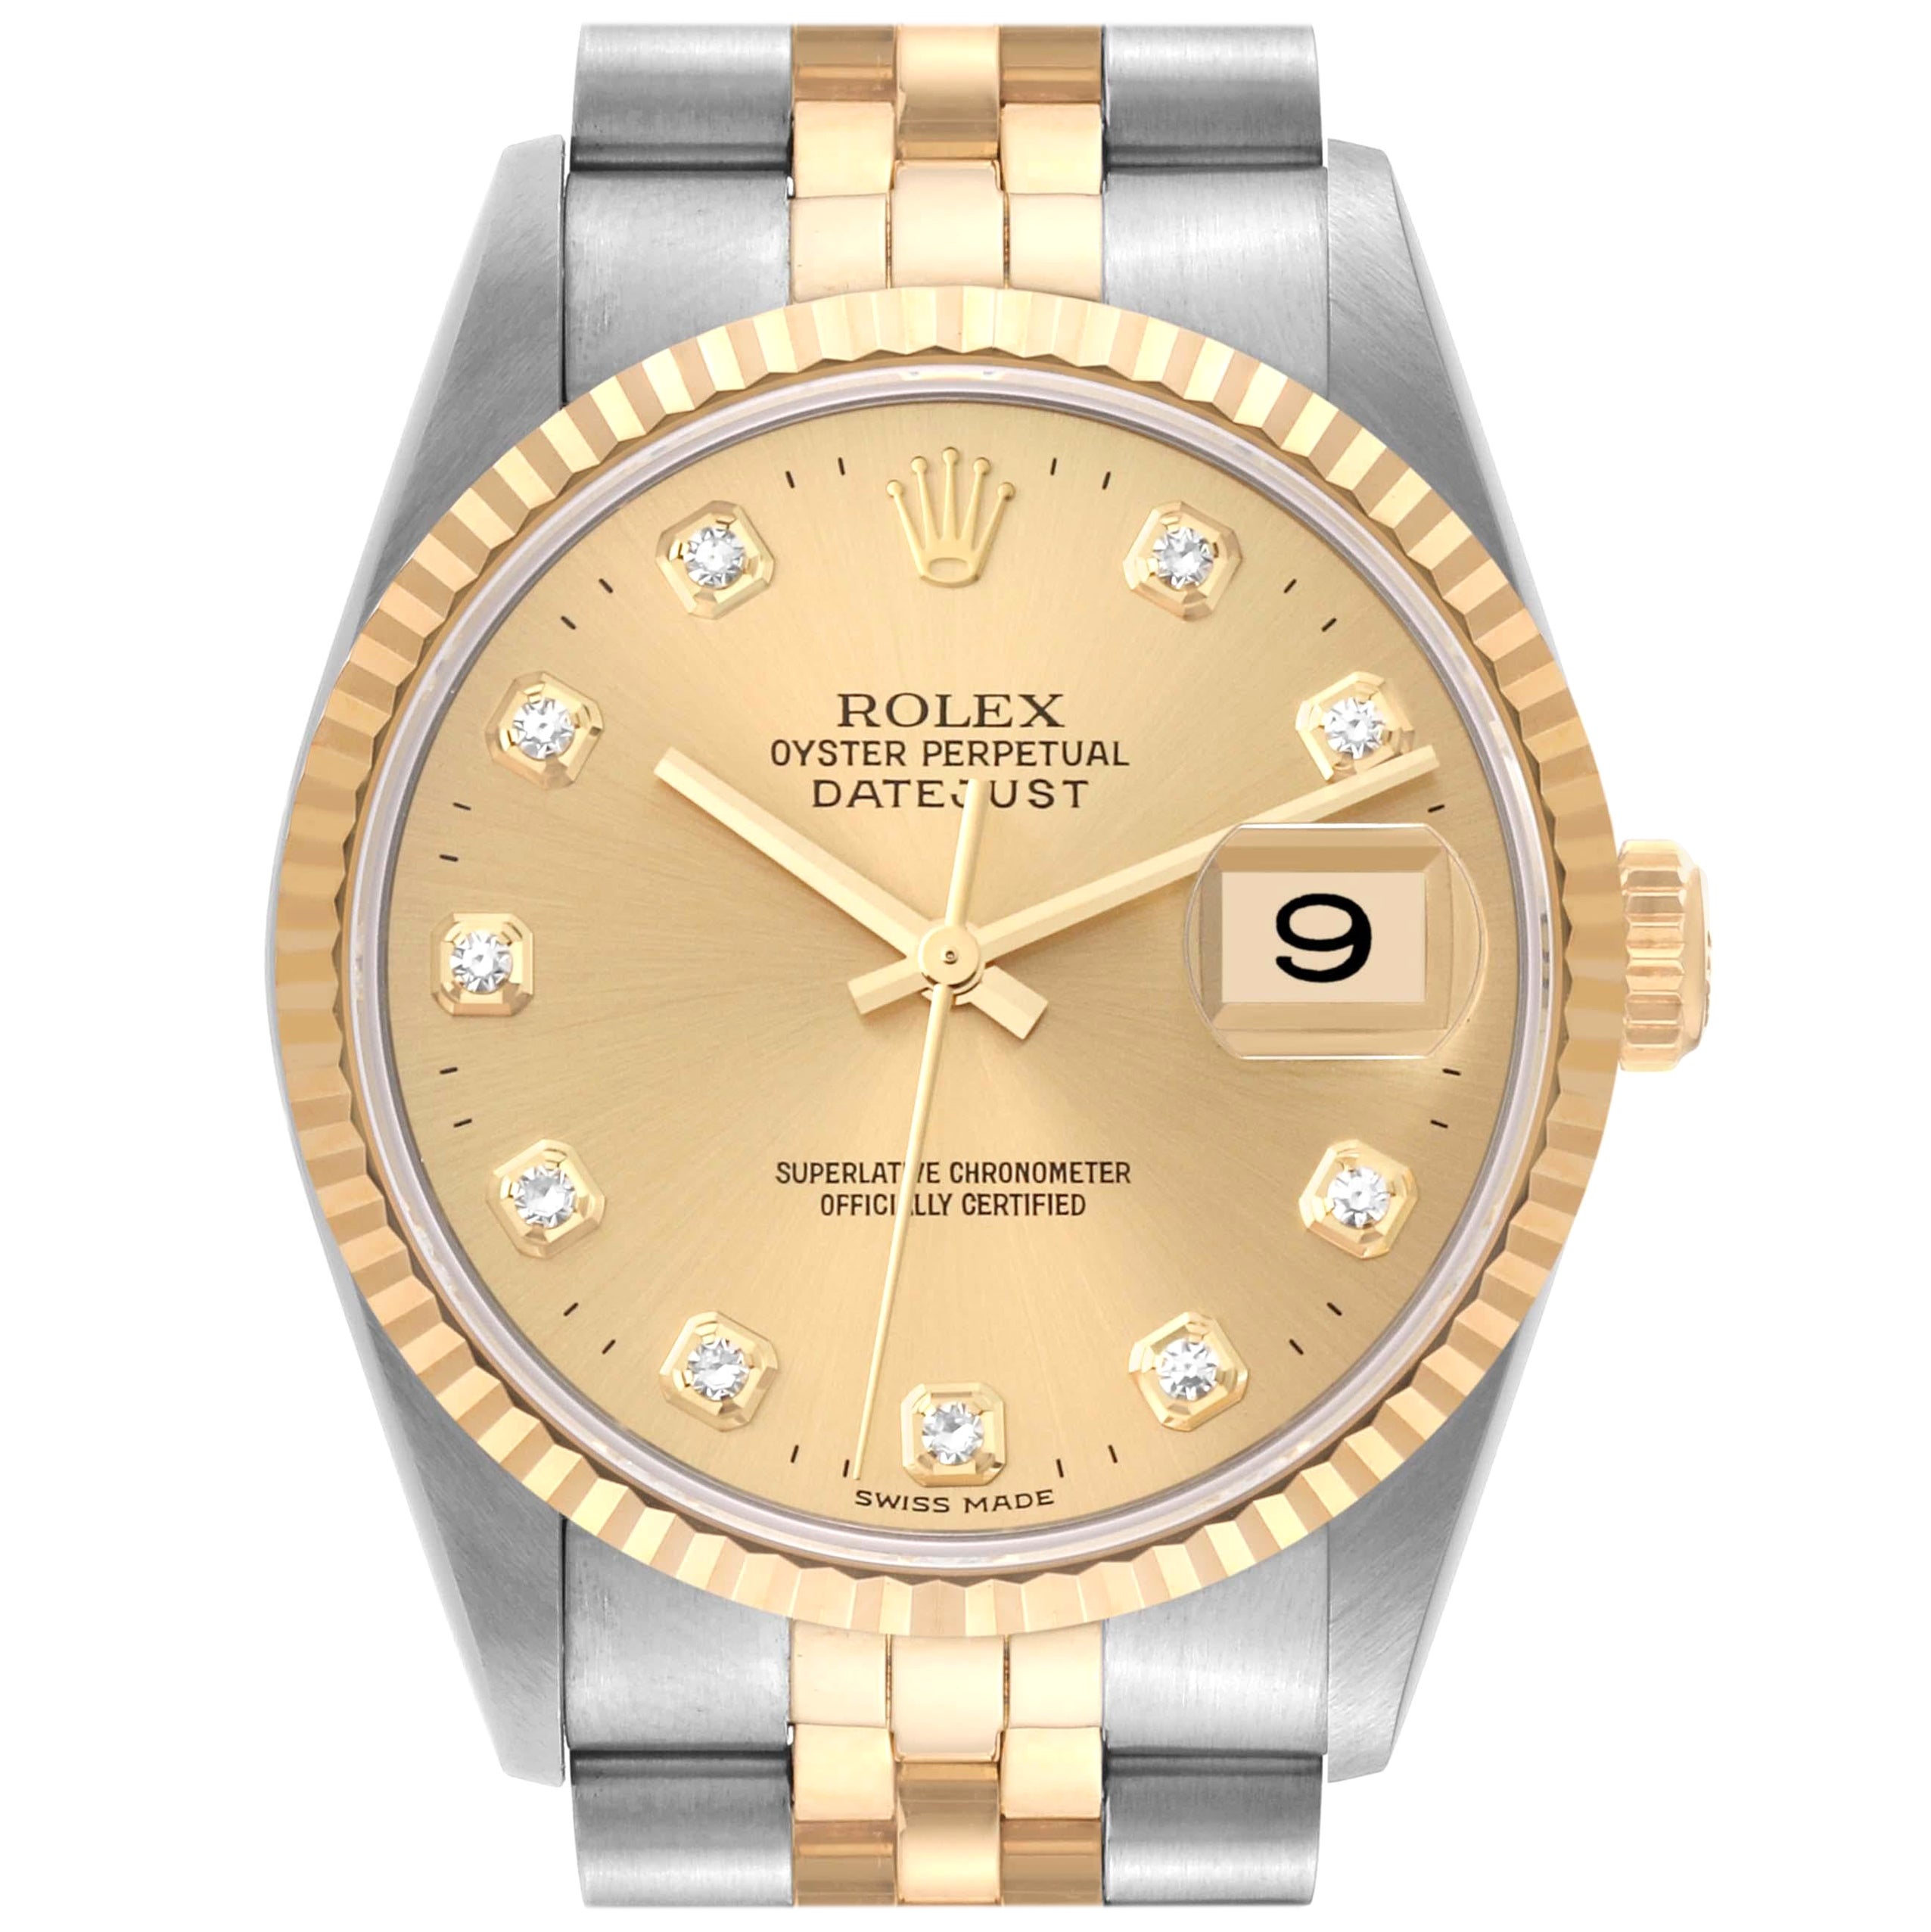 How does a Rolex’s second hand move?